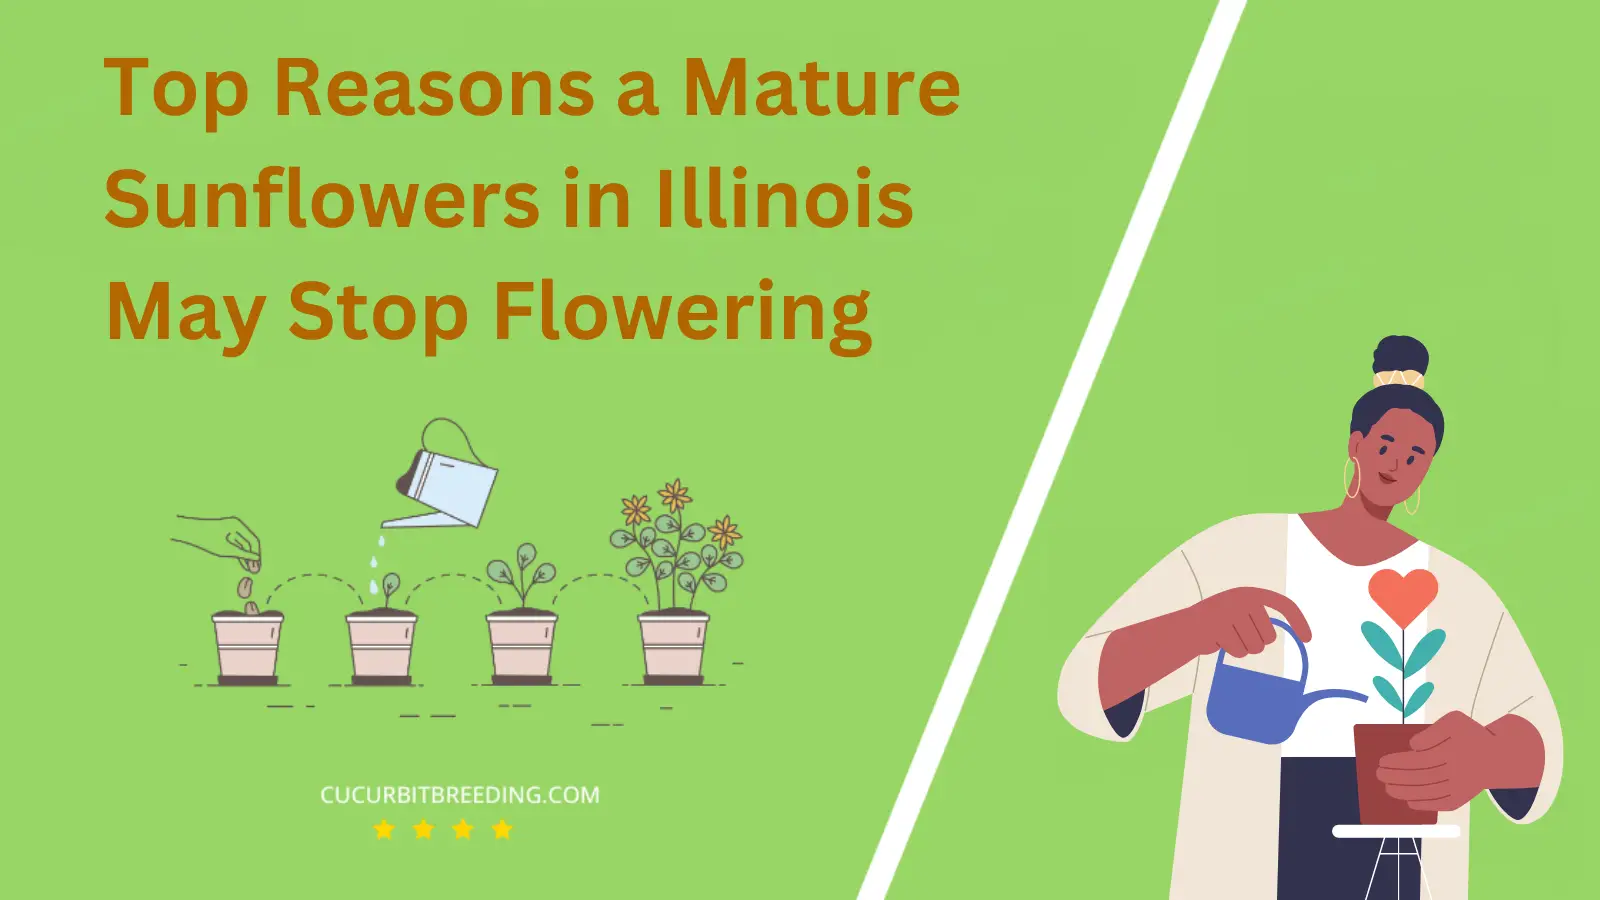 Top Reasons a Mature Sunflowers in Illinois May Stop Flowering